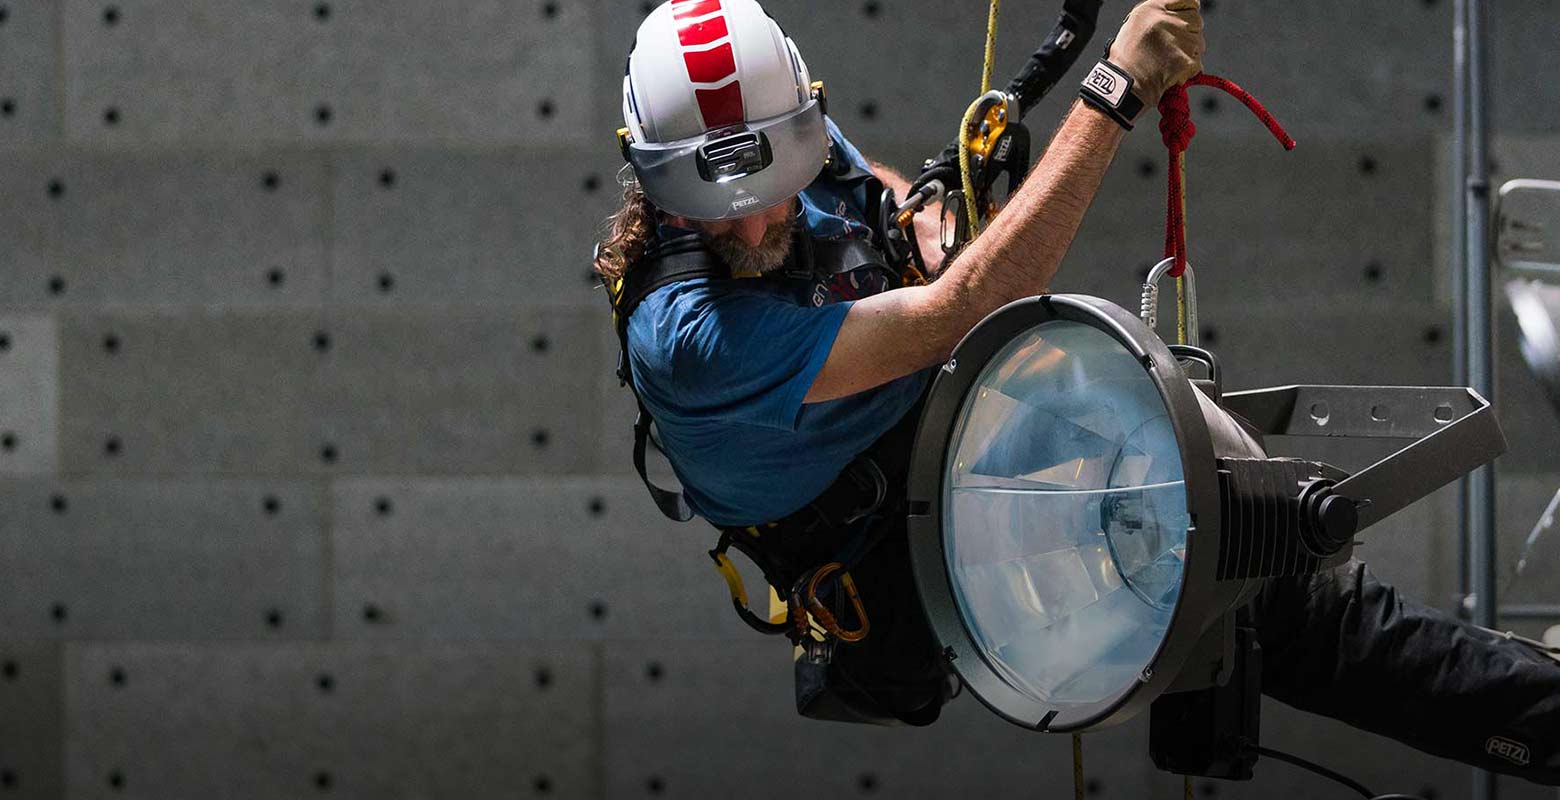 Petzl Canada - equipment, headlamps, and techniques for alpinism, climbing,  and work at height